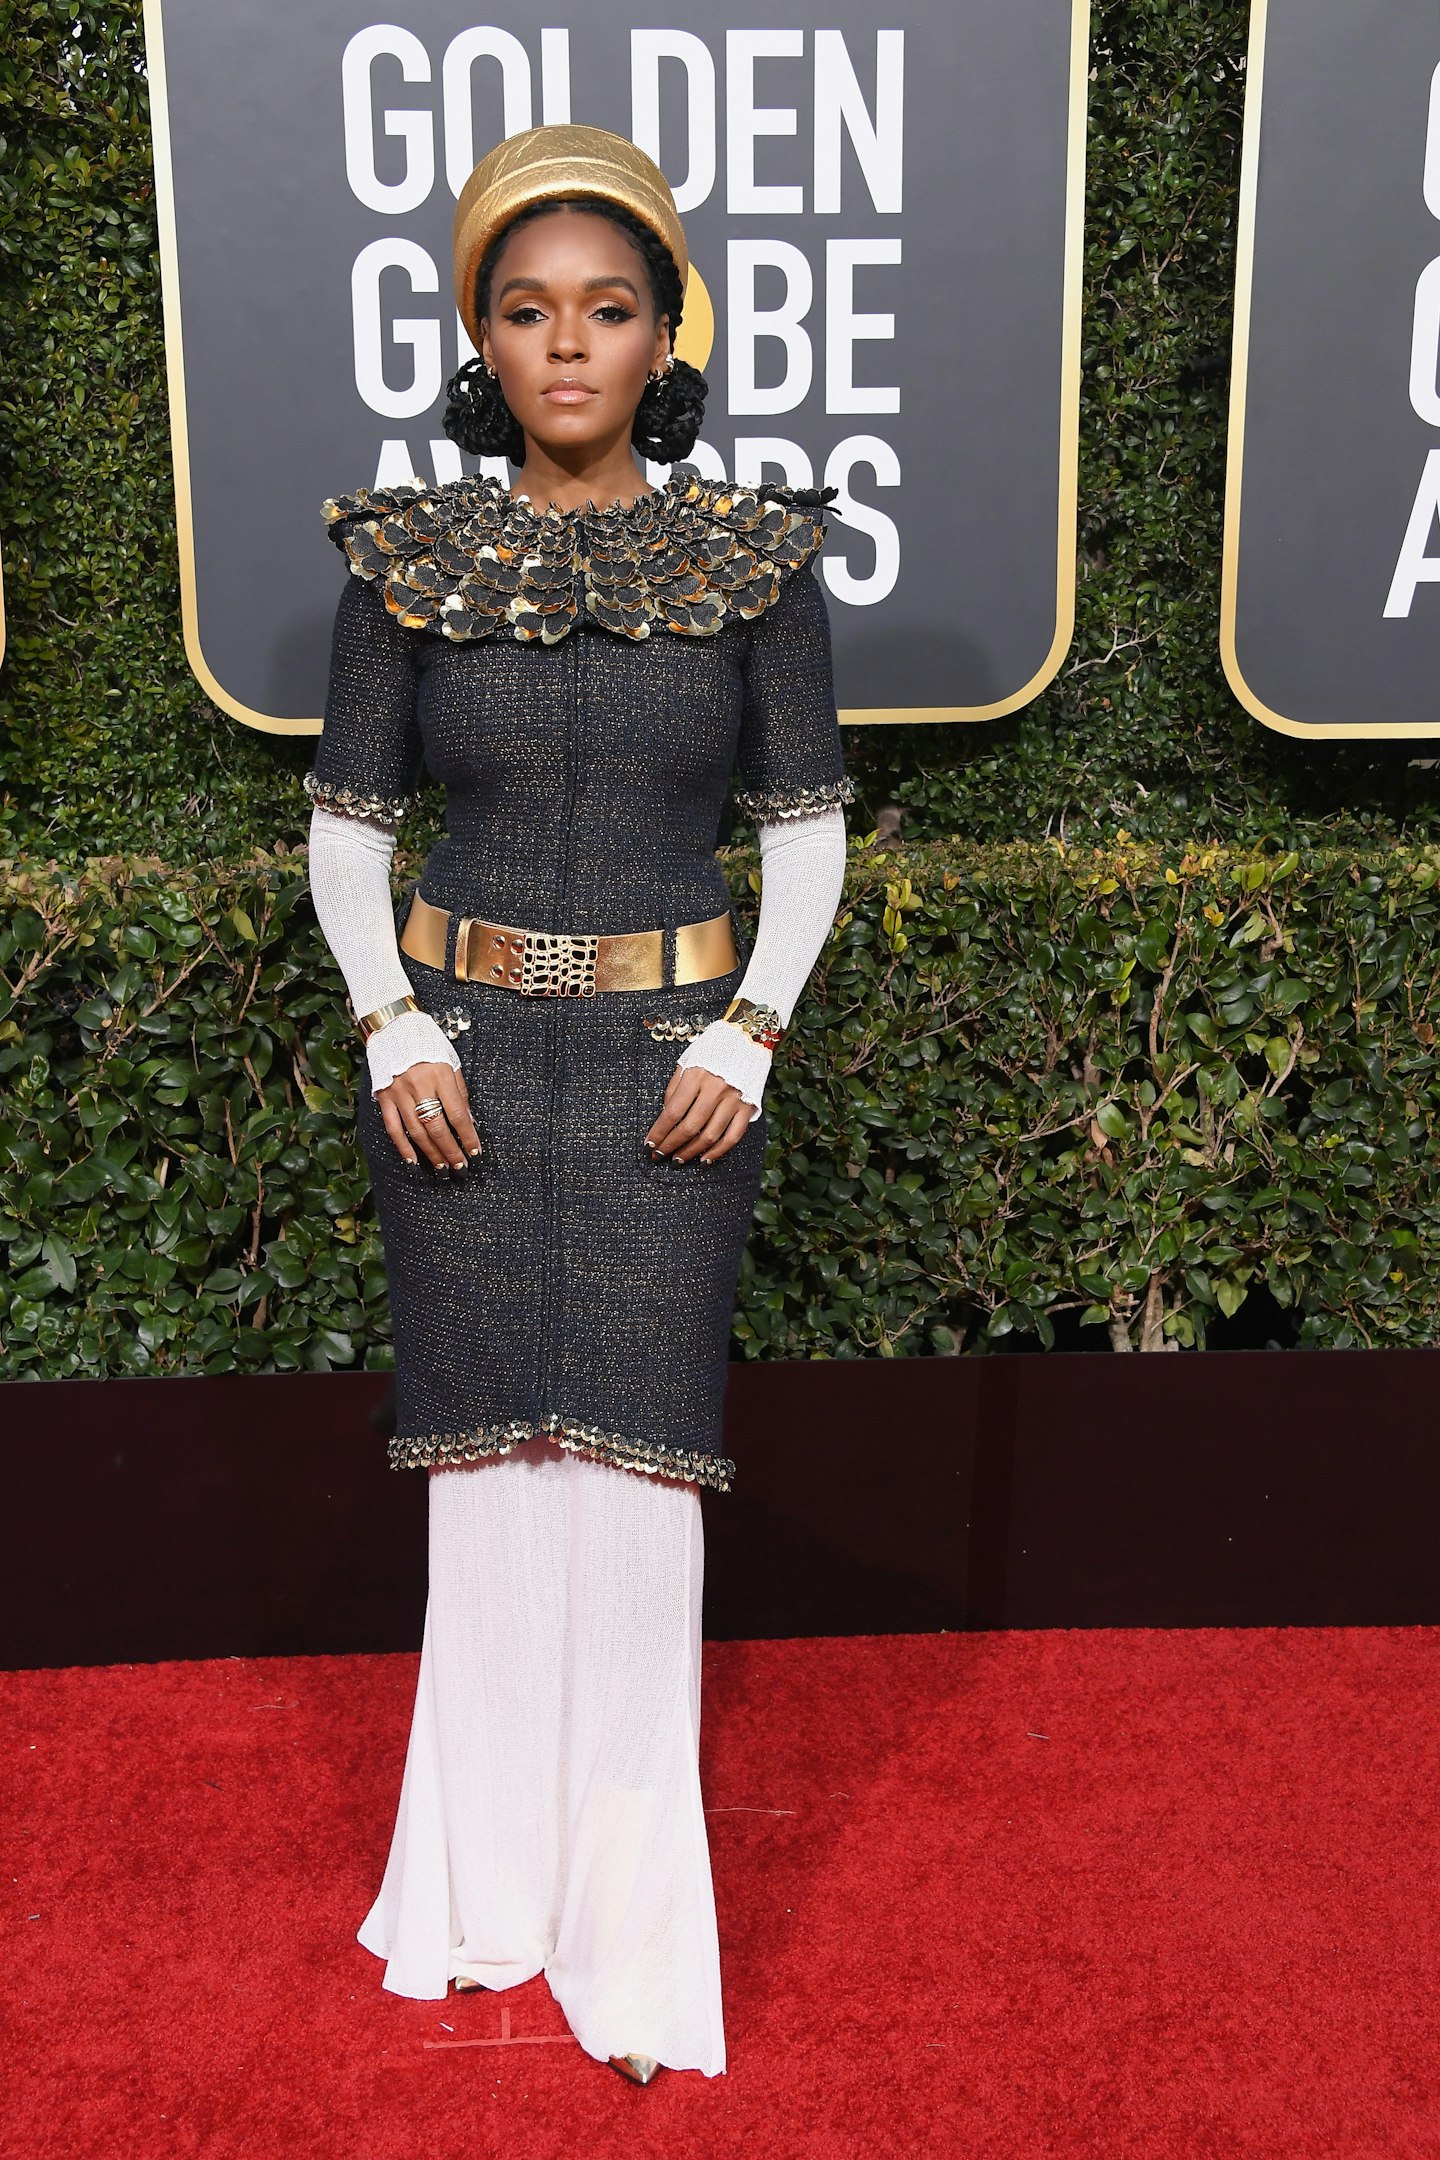 Janelle Monae at the 2019 Golden Globes